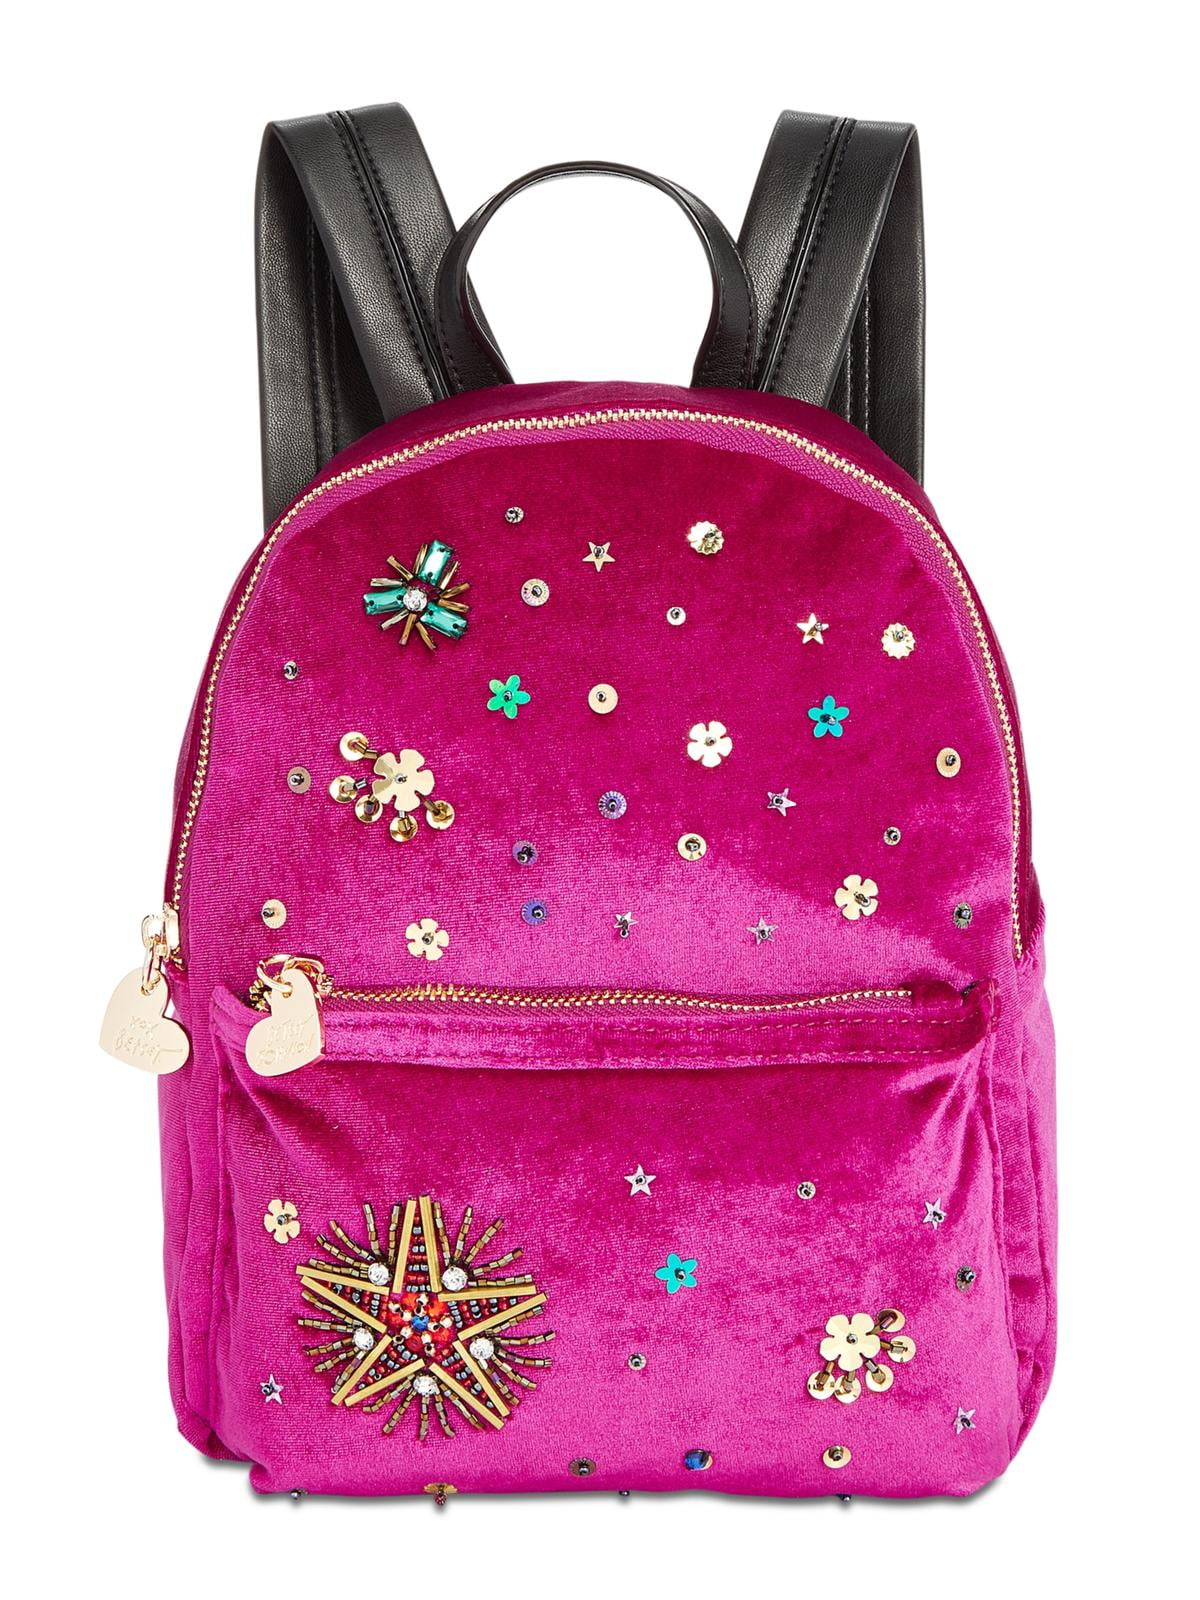 Betsey Johnson Women's Brainer Skull Mini Backpack, Black, One Size :  Amazon.ca: Clothing, Shoes & Accessories